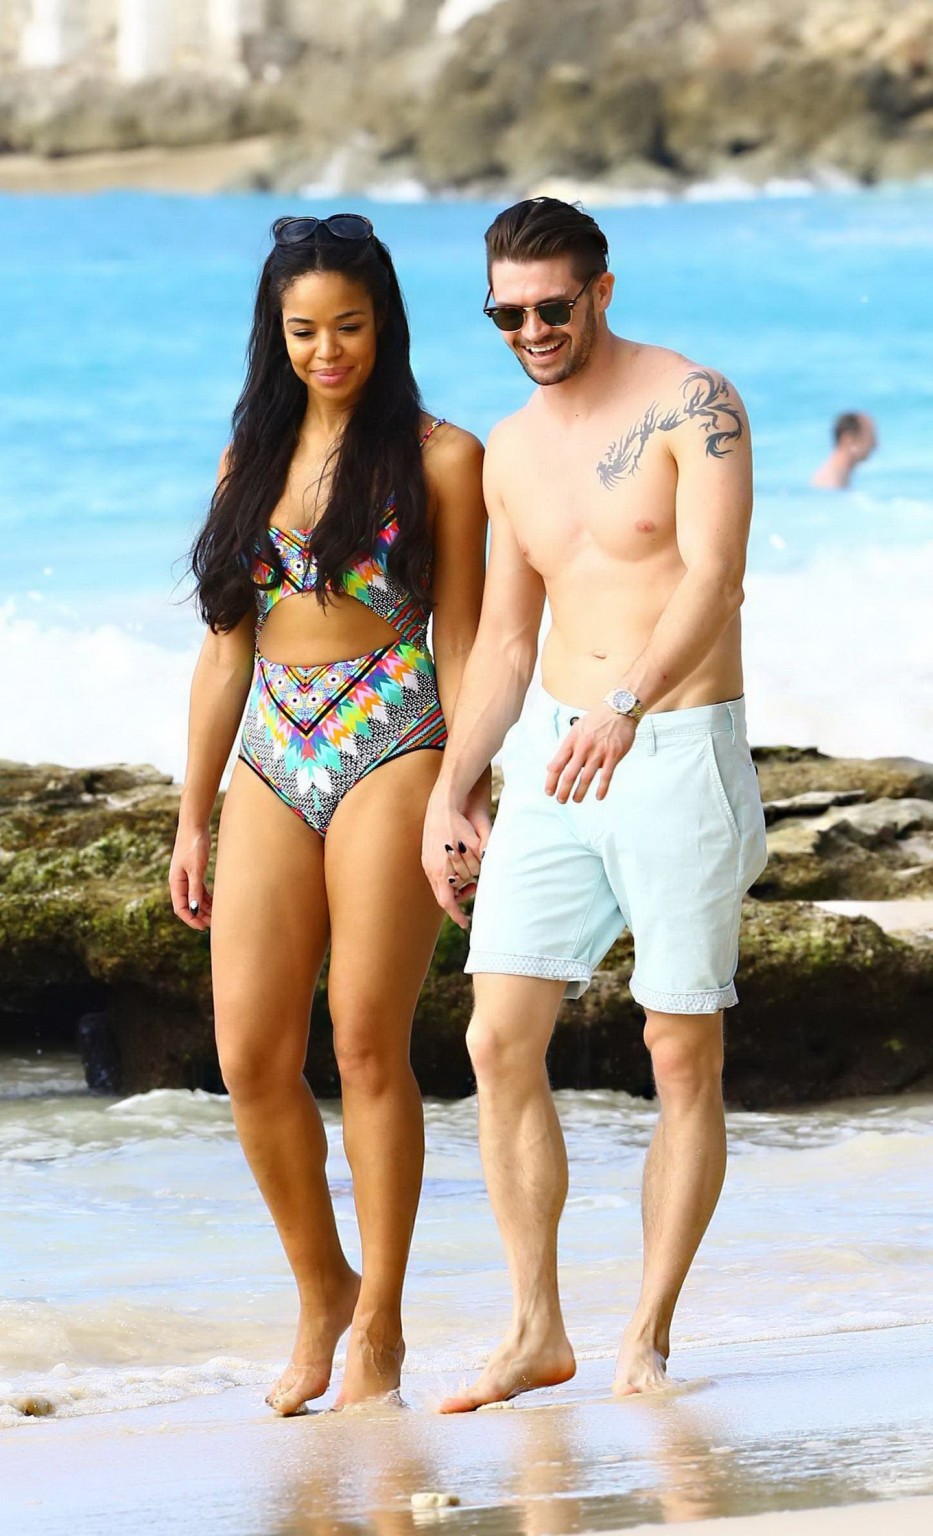 Sarah Jane Crawford shows off her seductive curves in a colorful swimsuit at the #75176833